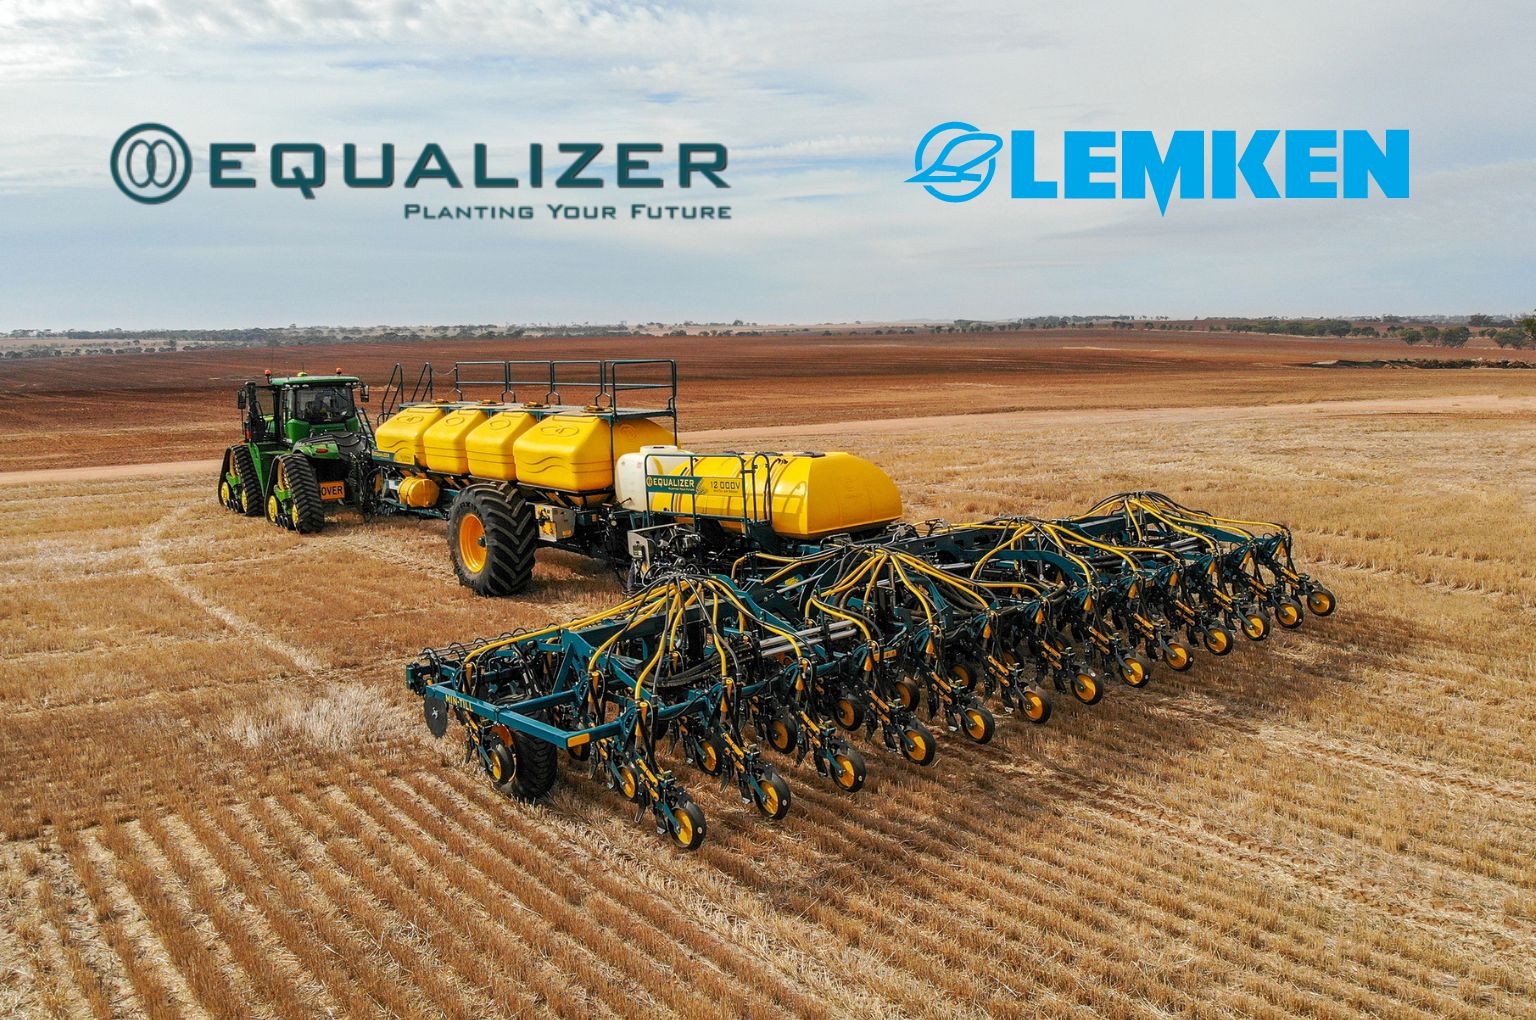 Lemken acquires Equalizer from South Africa